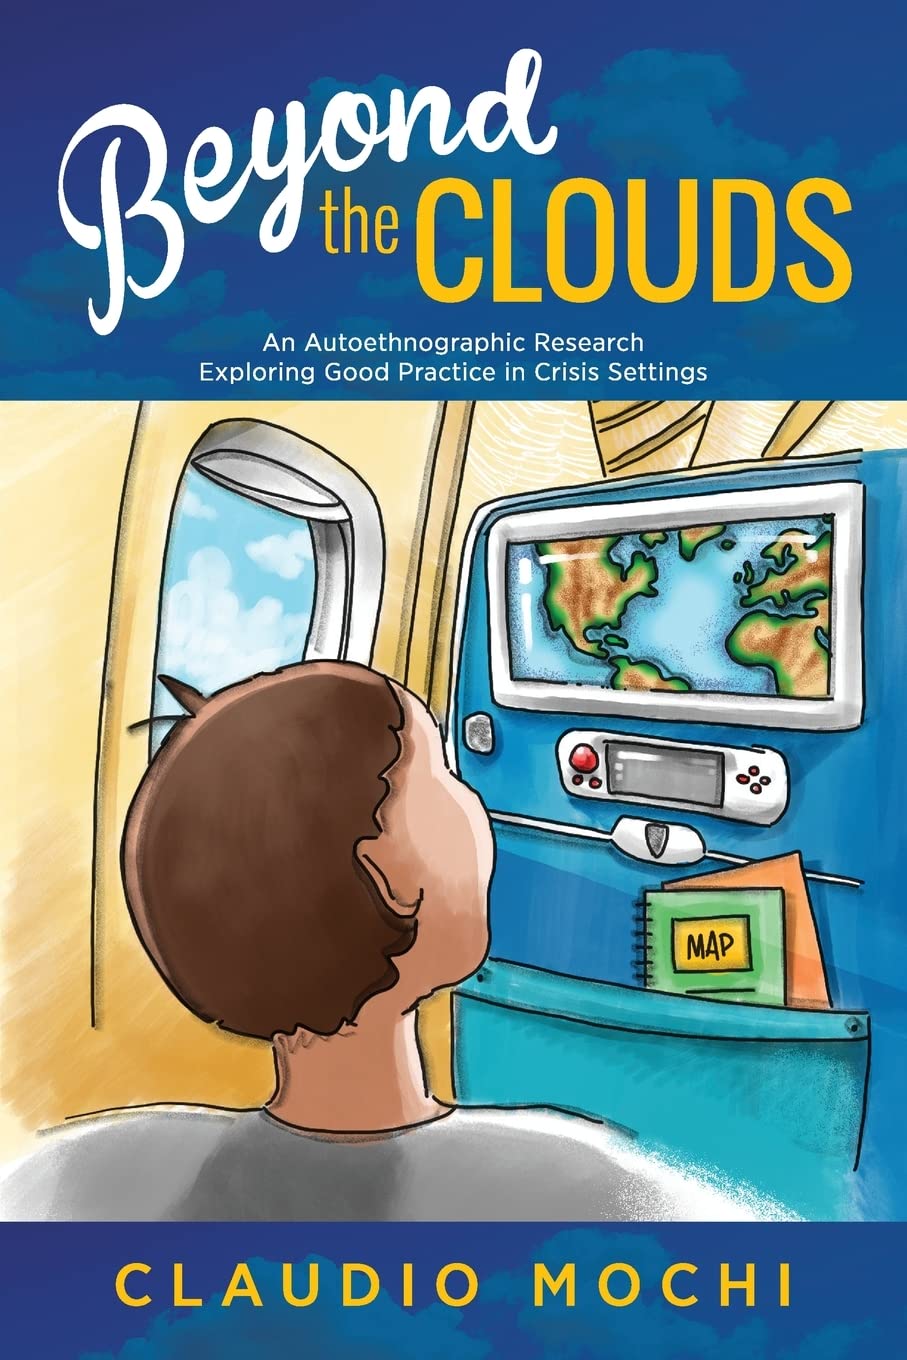 Beyond the Clouds: An Autoethnographic Research Exploring Good Practice In Crisis Settings A book written by Claudio Mochi